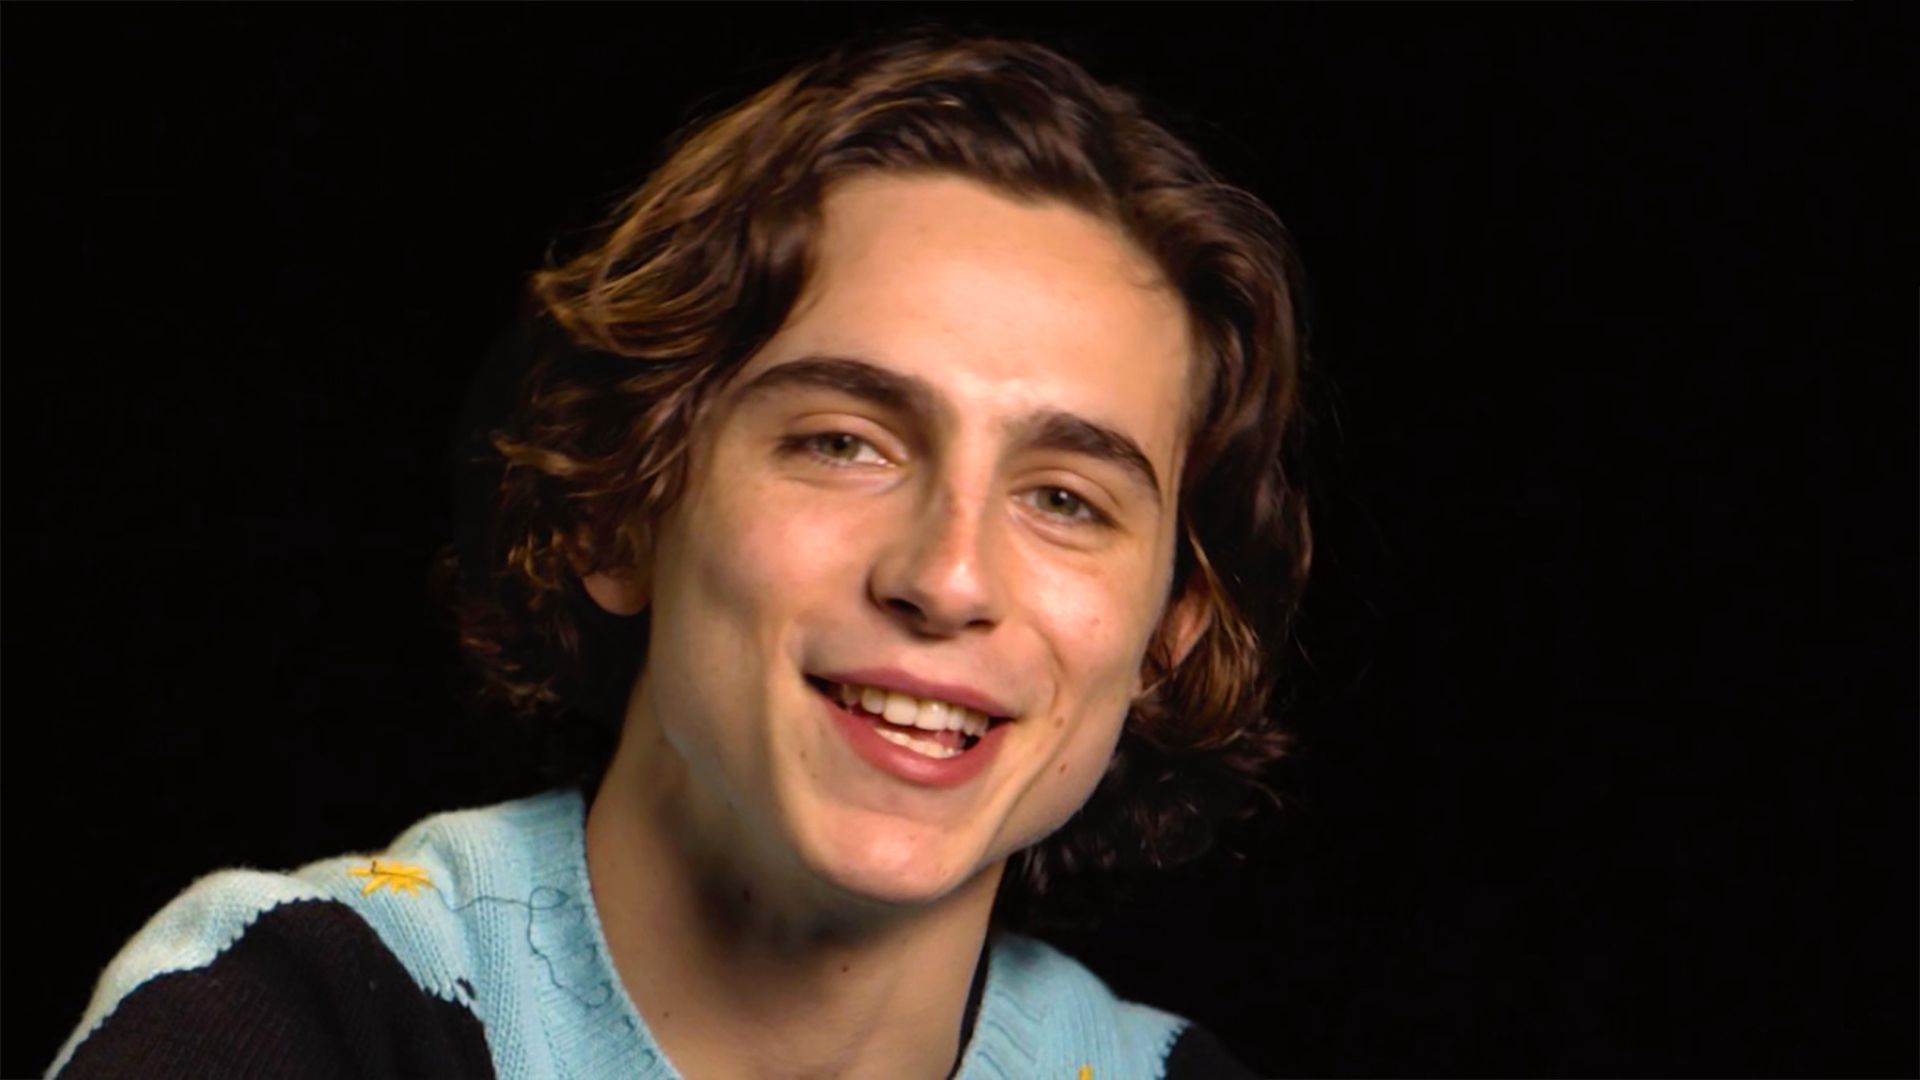 Timothée Chalamet Loved Playing With His Favorite Toy in